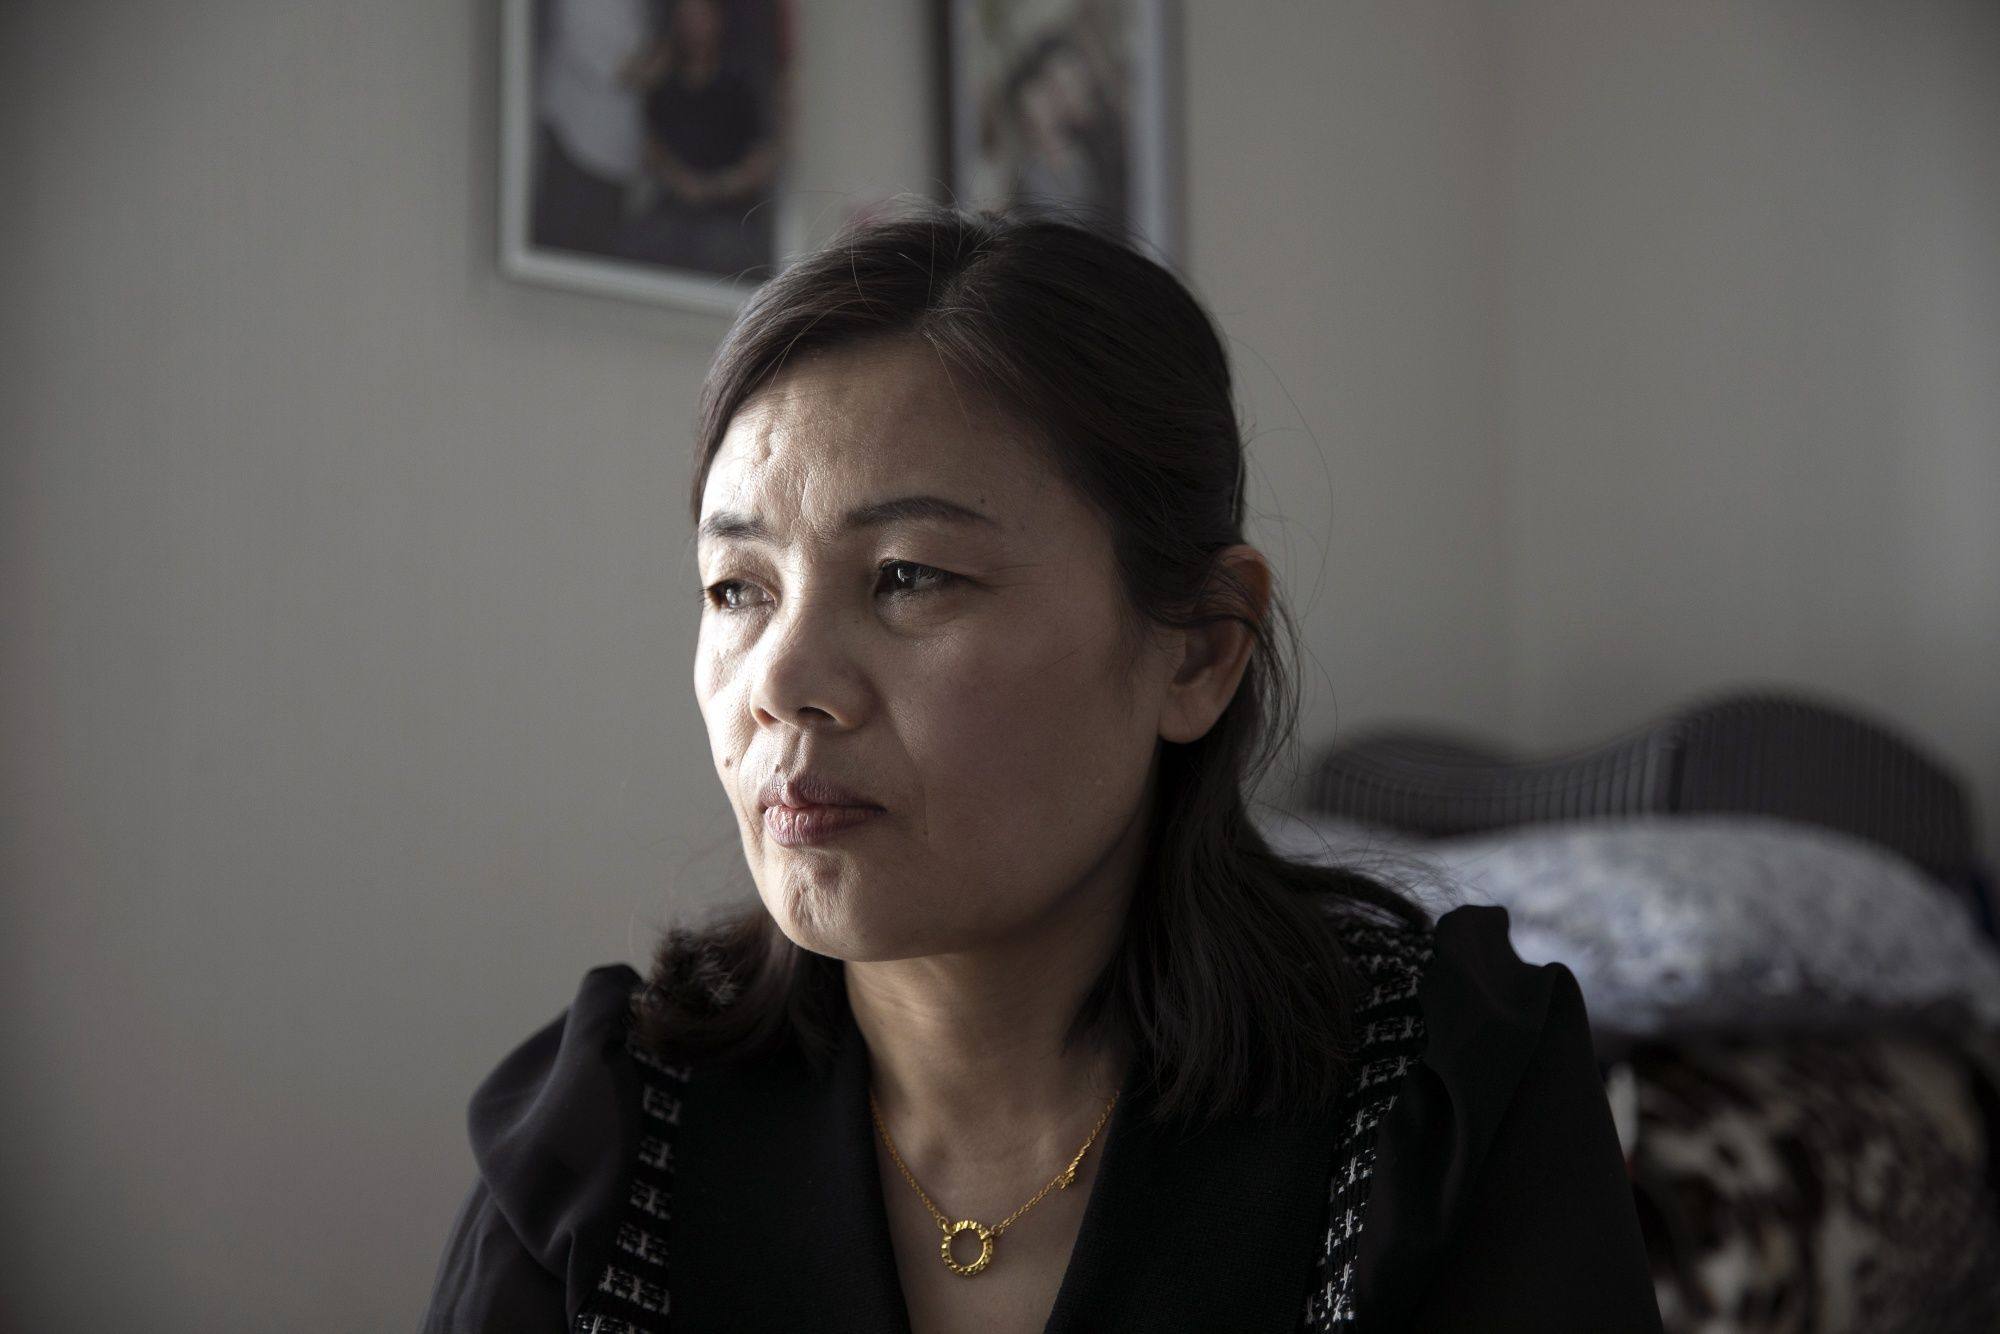 Im Su-ryuh, 51, fled North Korea just before the border with China was closed due to the pandemic. She said she often cries because she misses the family she left behind. Photo: Bloomberg